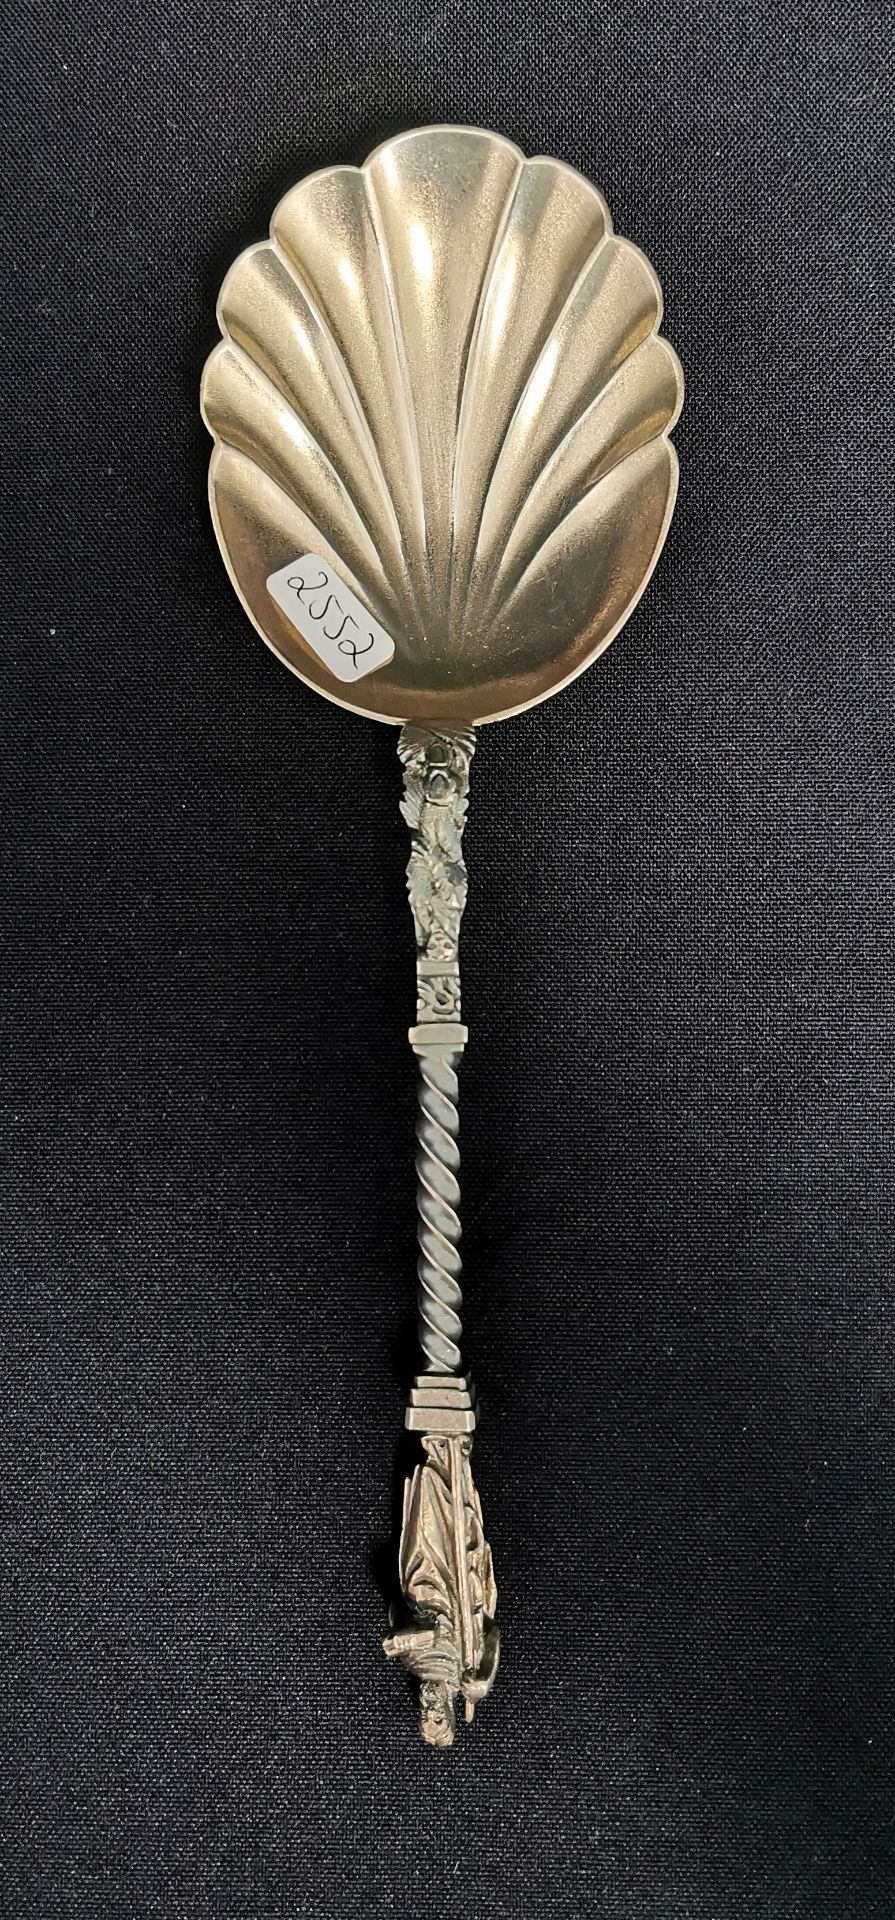 SILVER PLATED ENGLISH APOSTLE SPOON